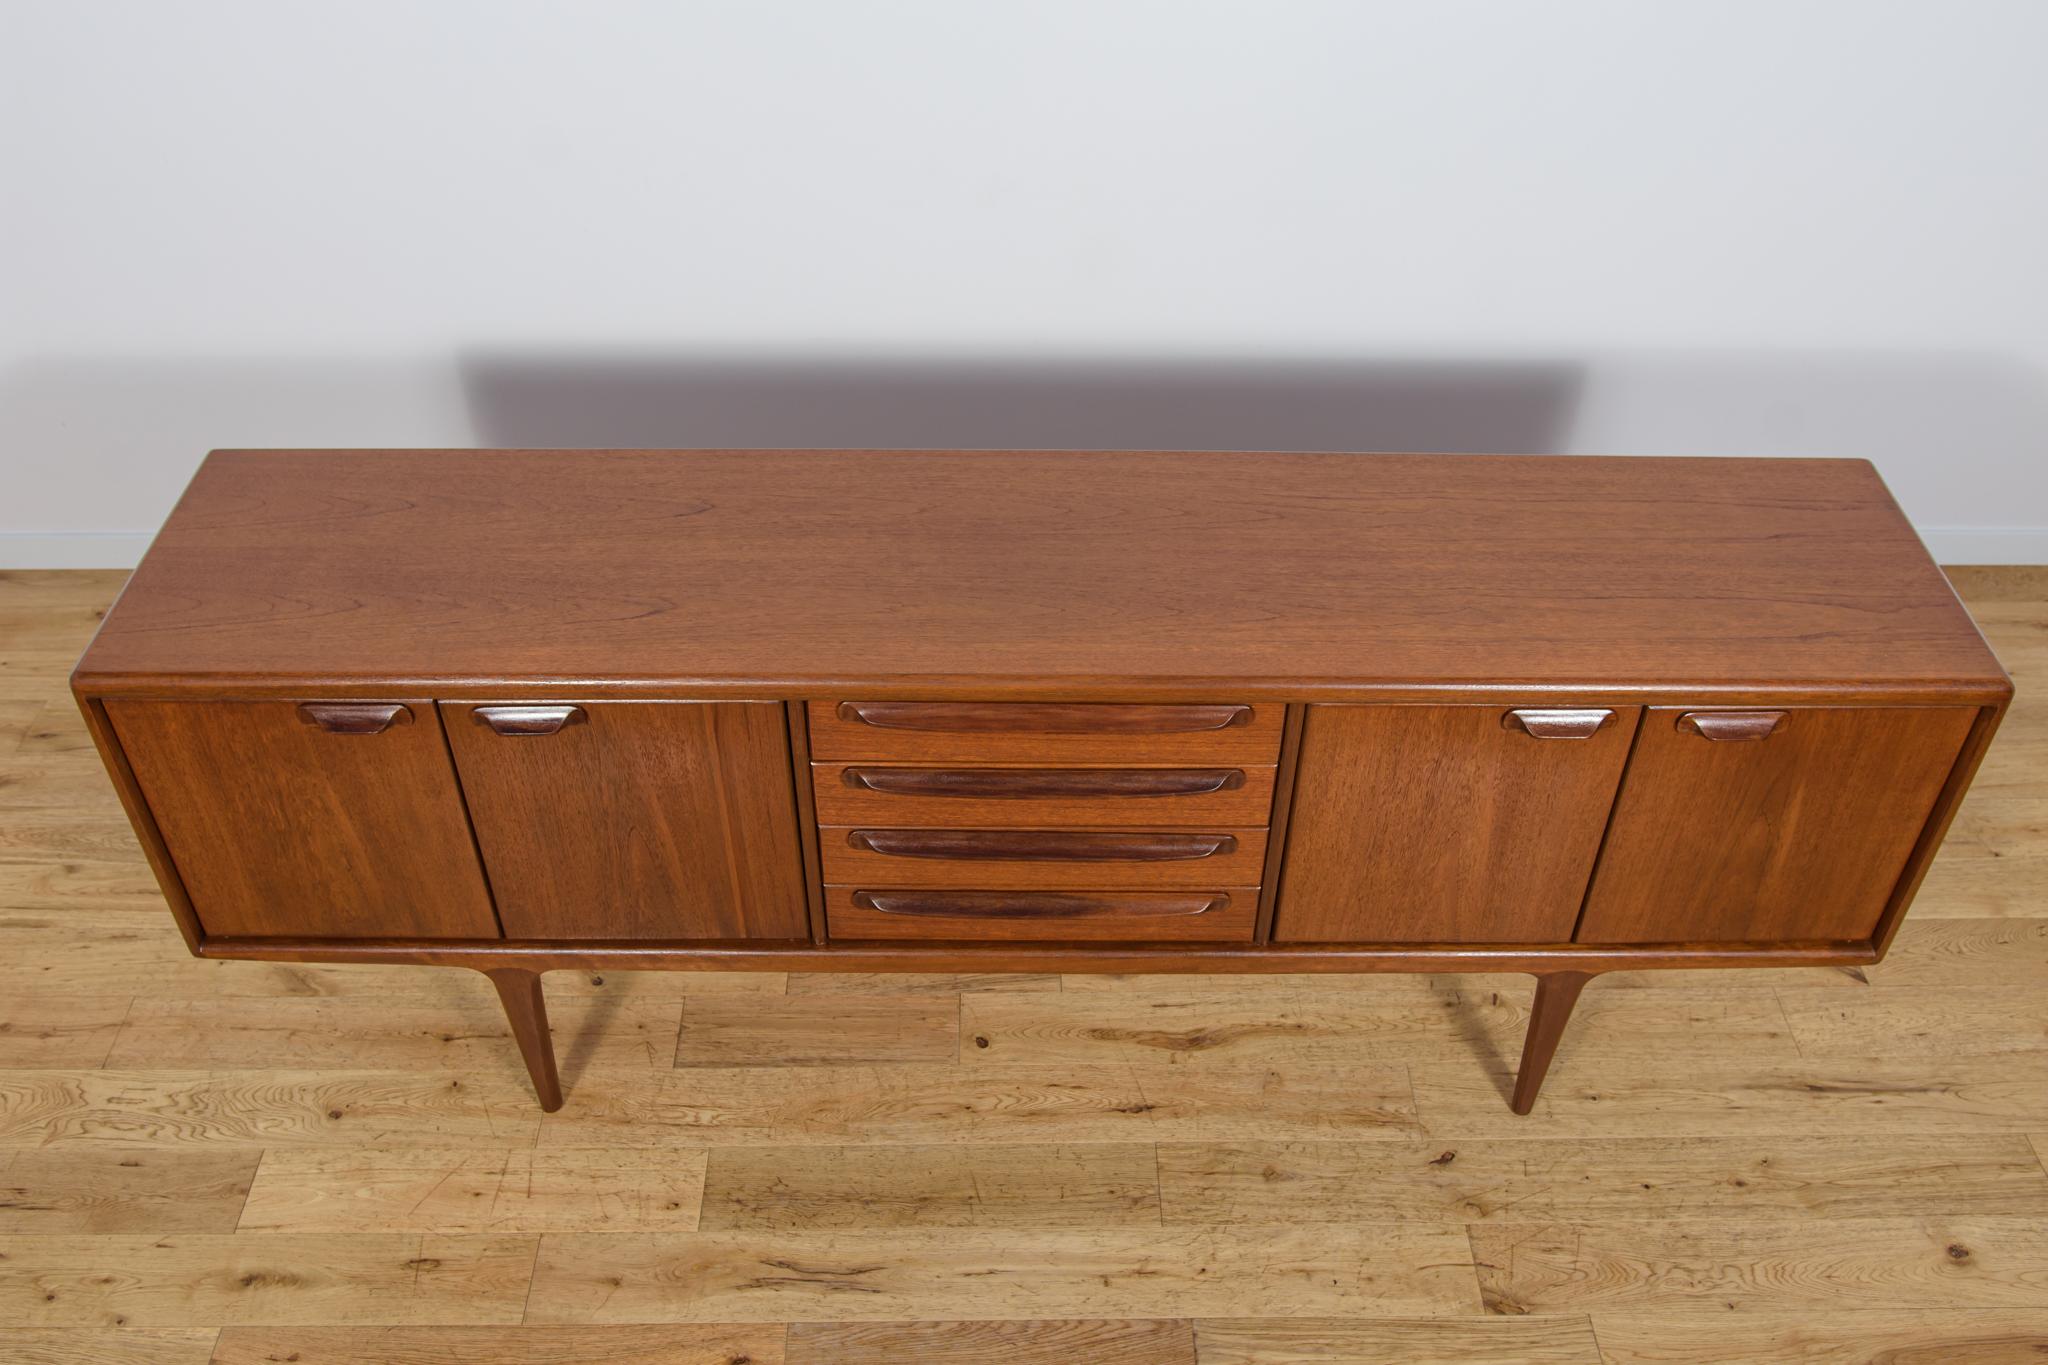 British Mid-Century Teak Sideboard Model Sequence by John Herbert for A.Younger Ltd, Gre For Sale